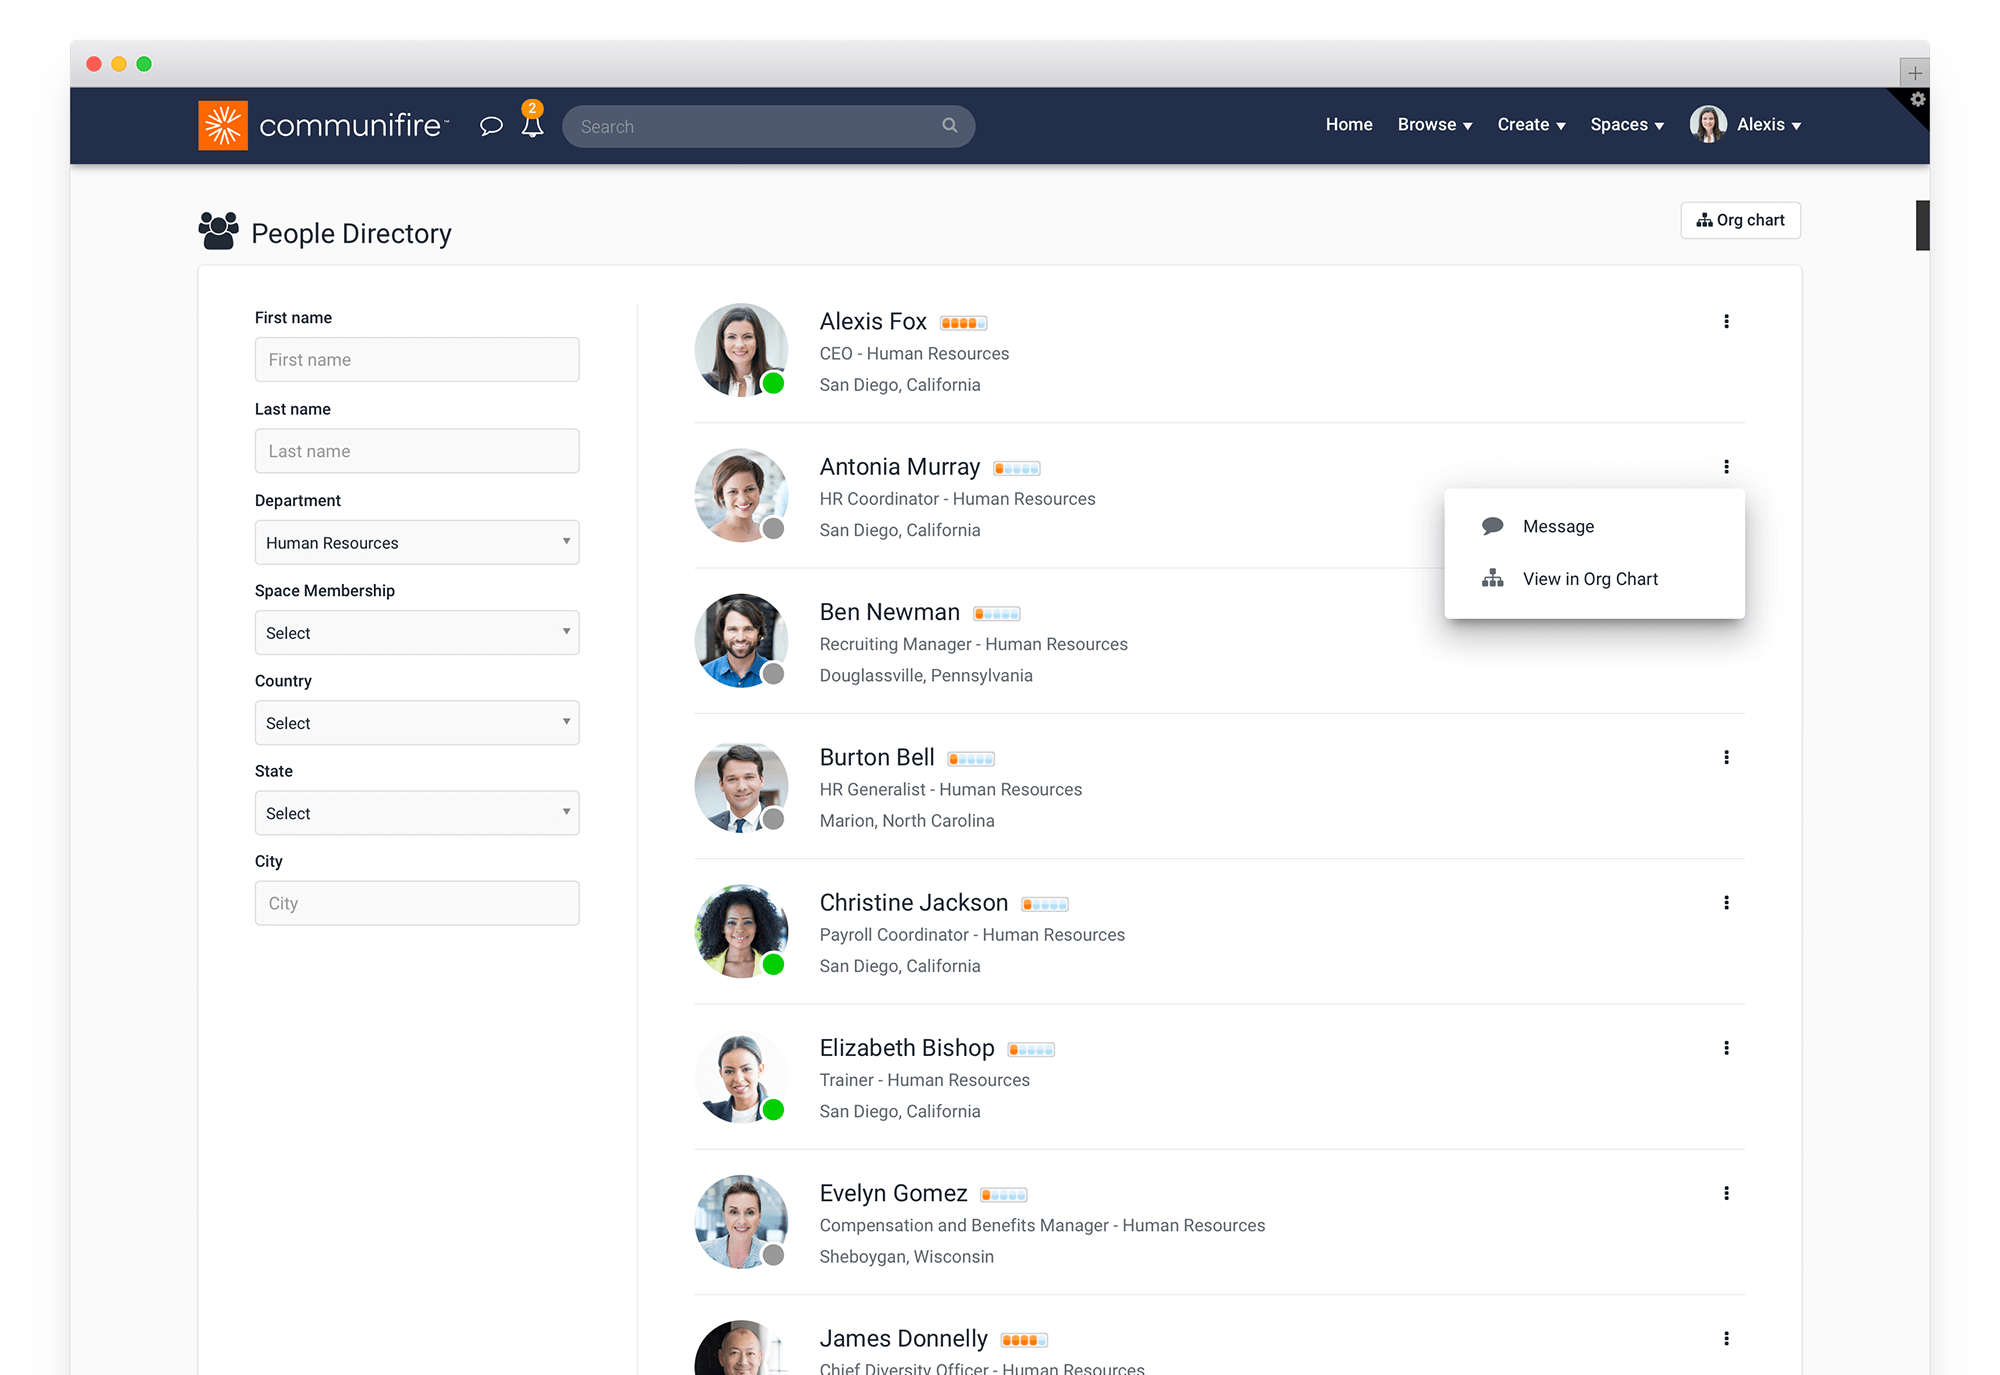 Employee directory for credit unions